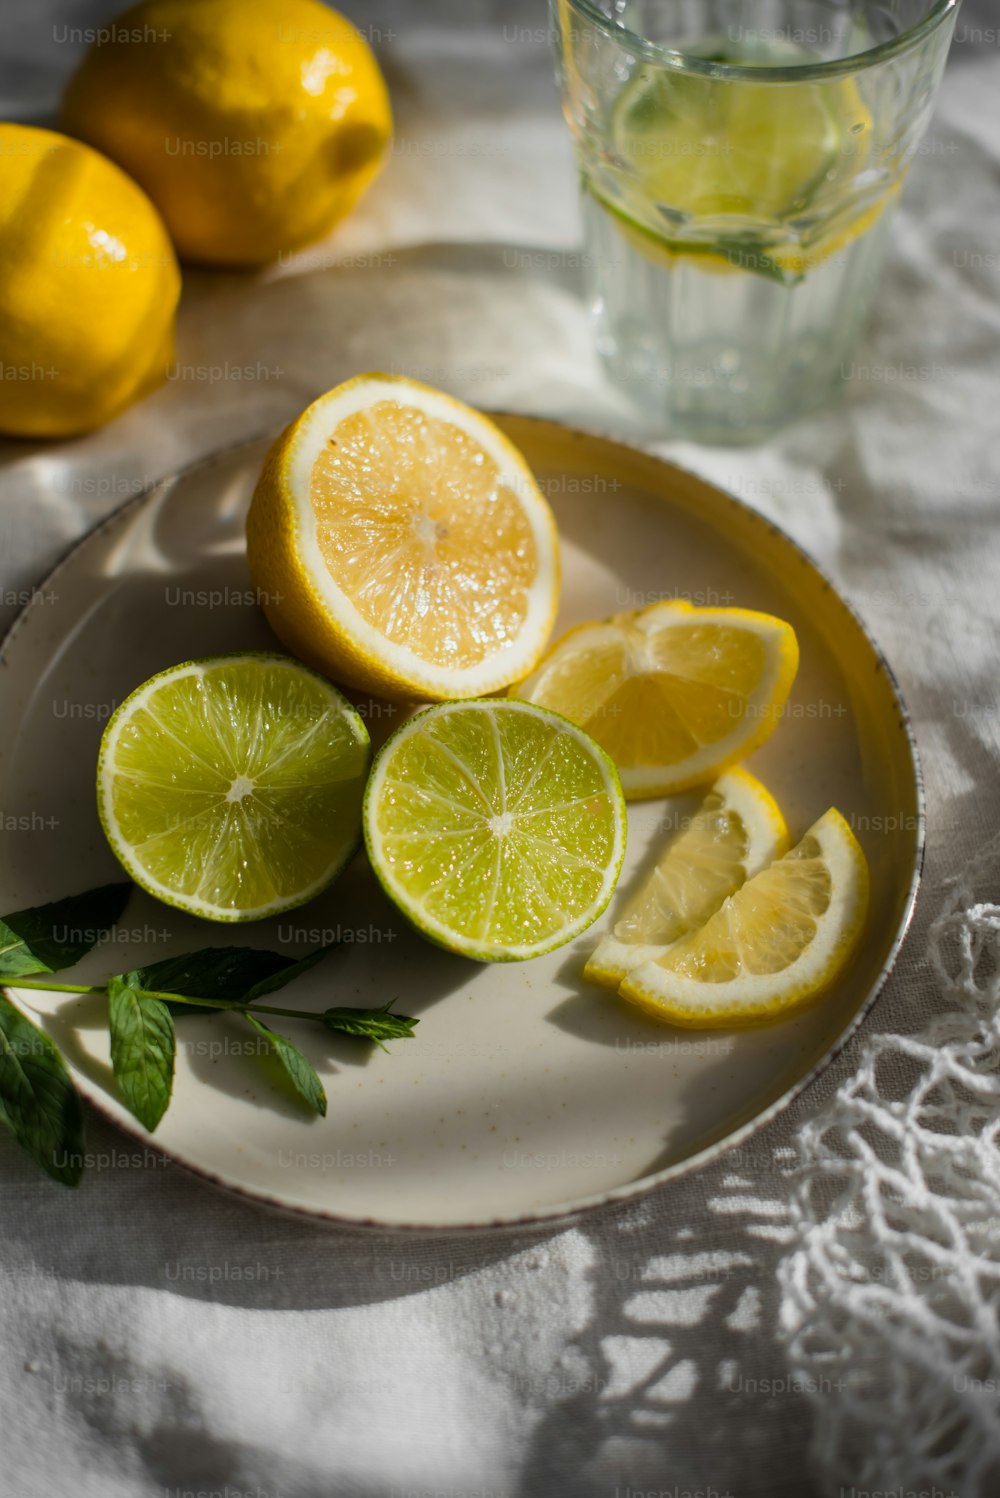 a plate of lemons and a glass of water